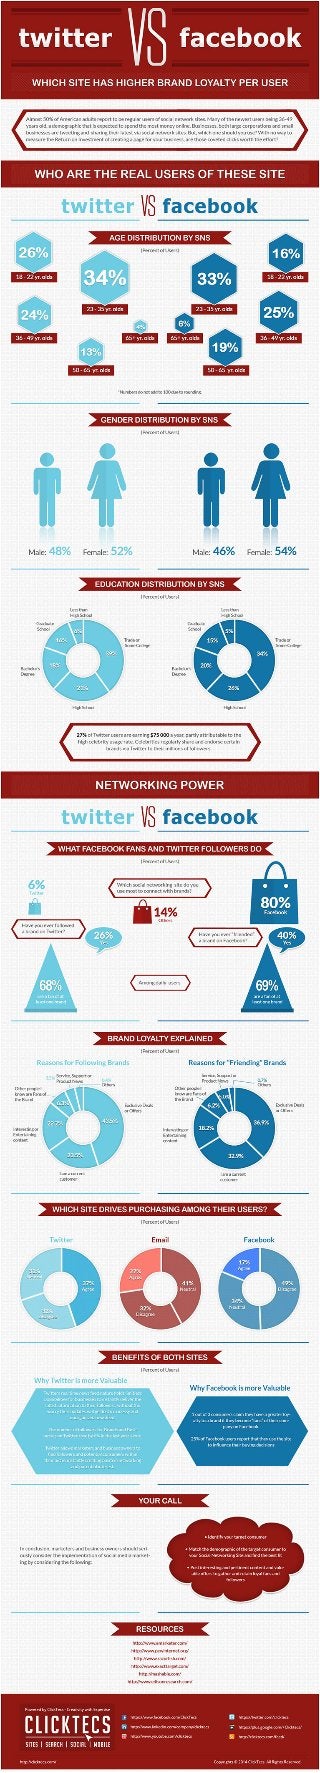 Twitter vs-facebook-which-social-networking-site-is-best-for-your-business-infographic